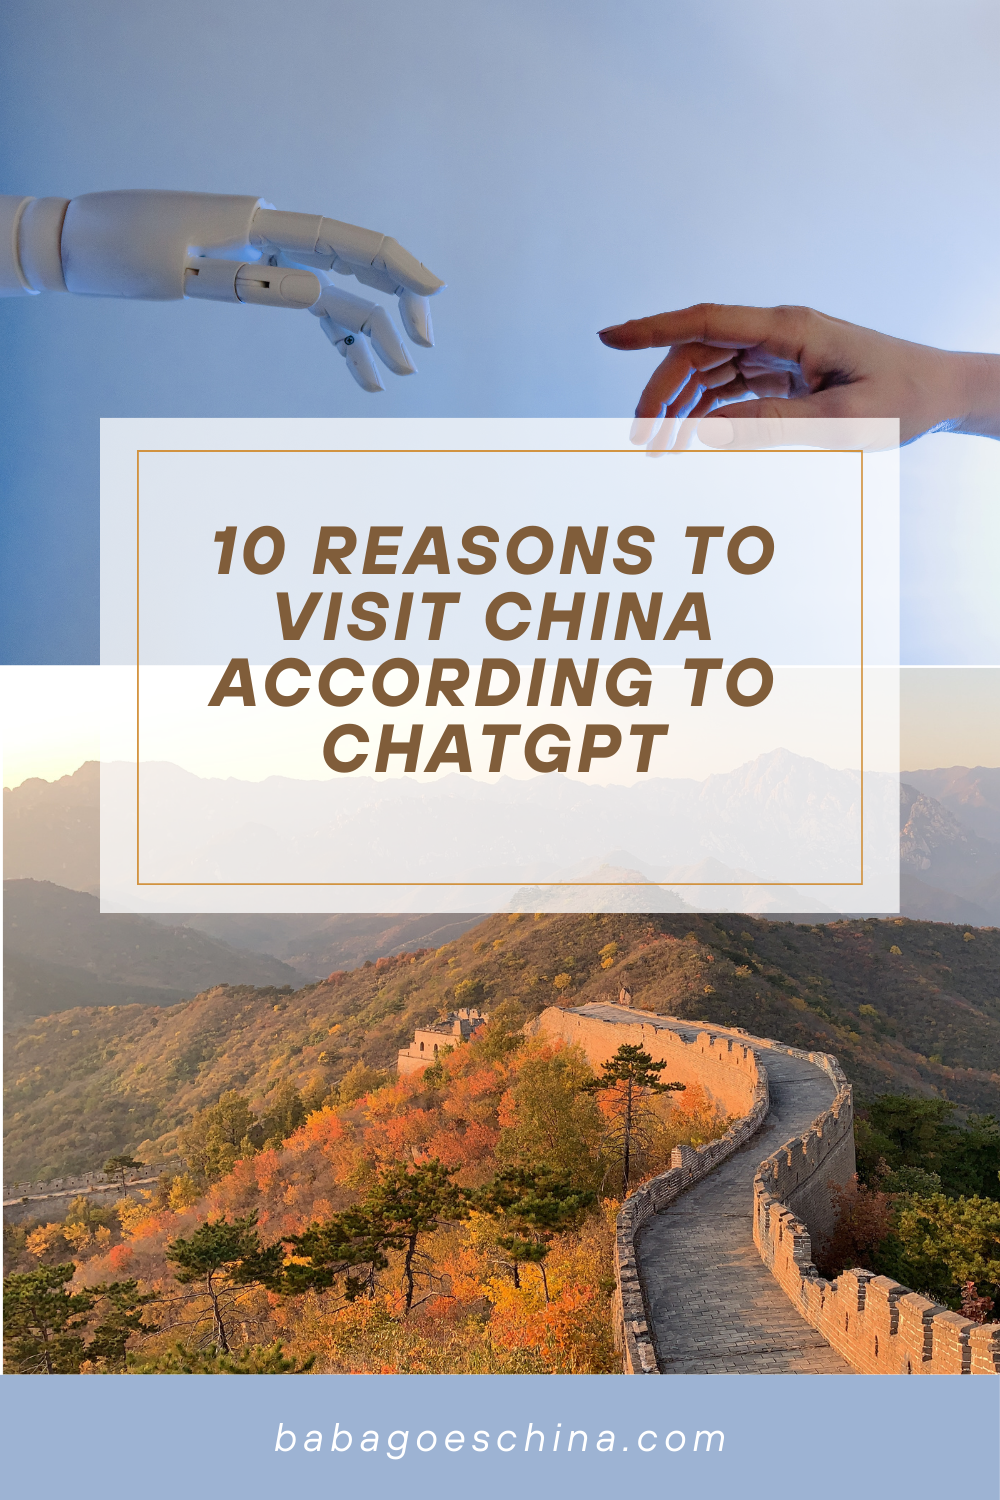 10 reasons to visit China with kids - according to ChatGPT